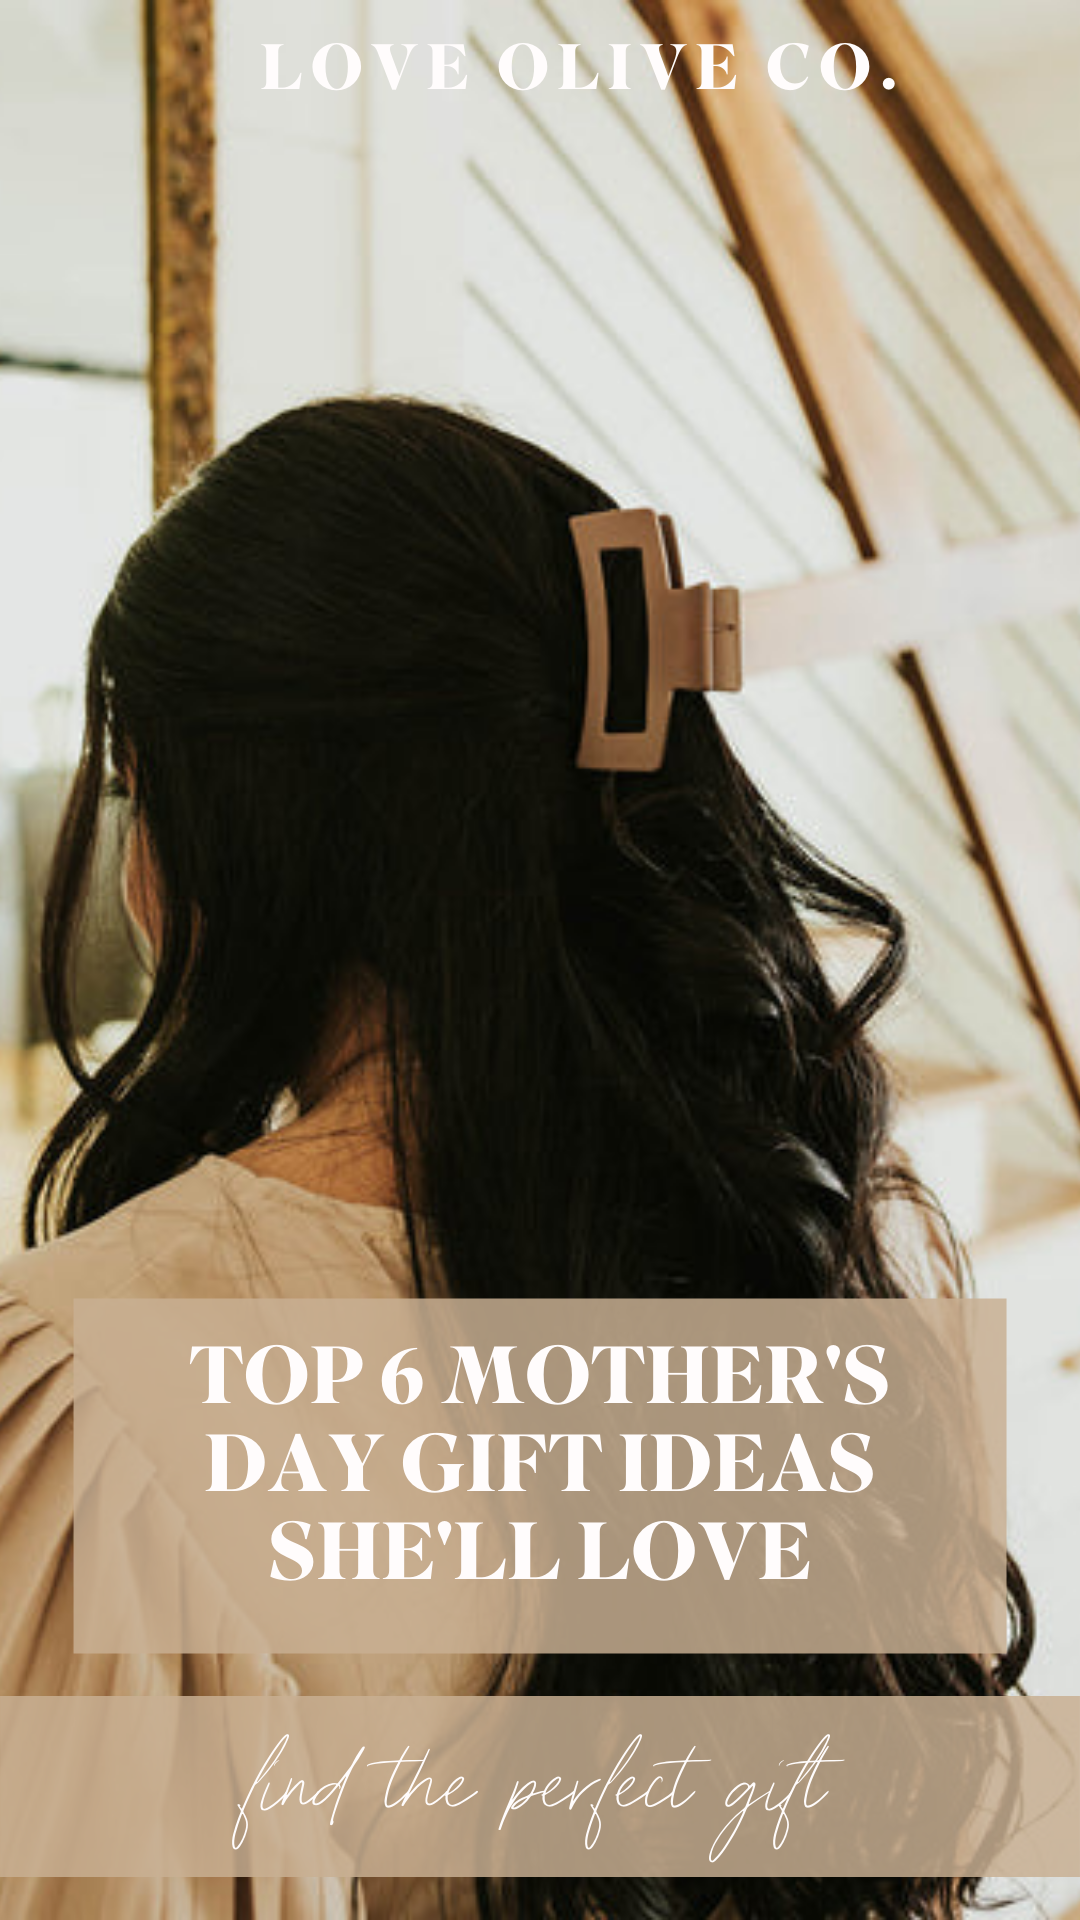 Top 6 Mother's Day Gift Ideas She'll Love